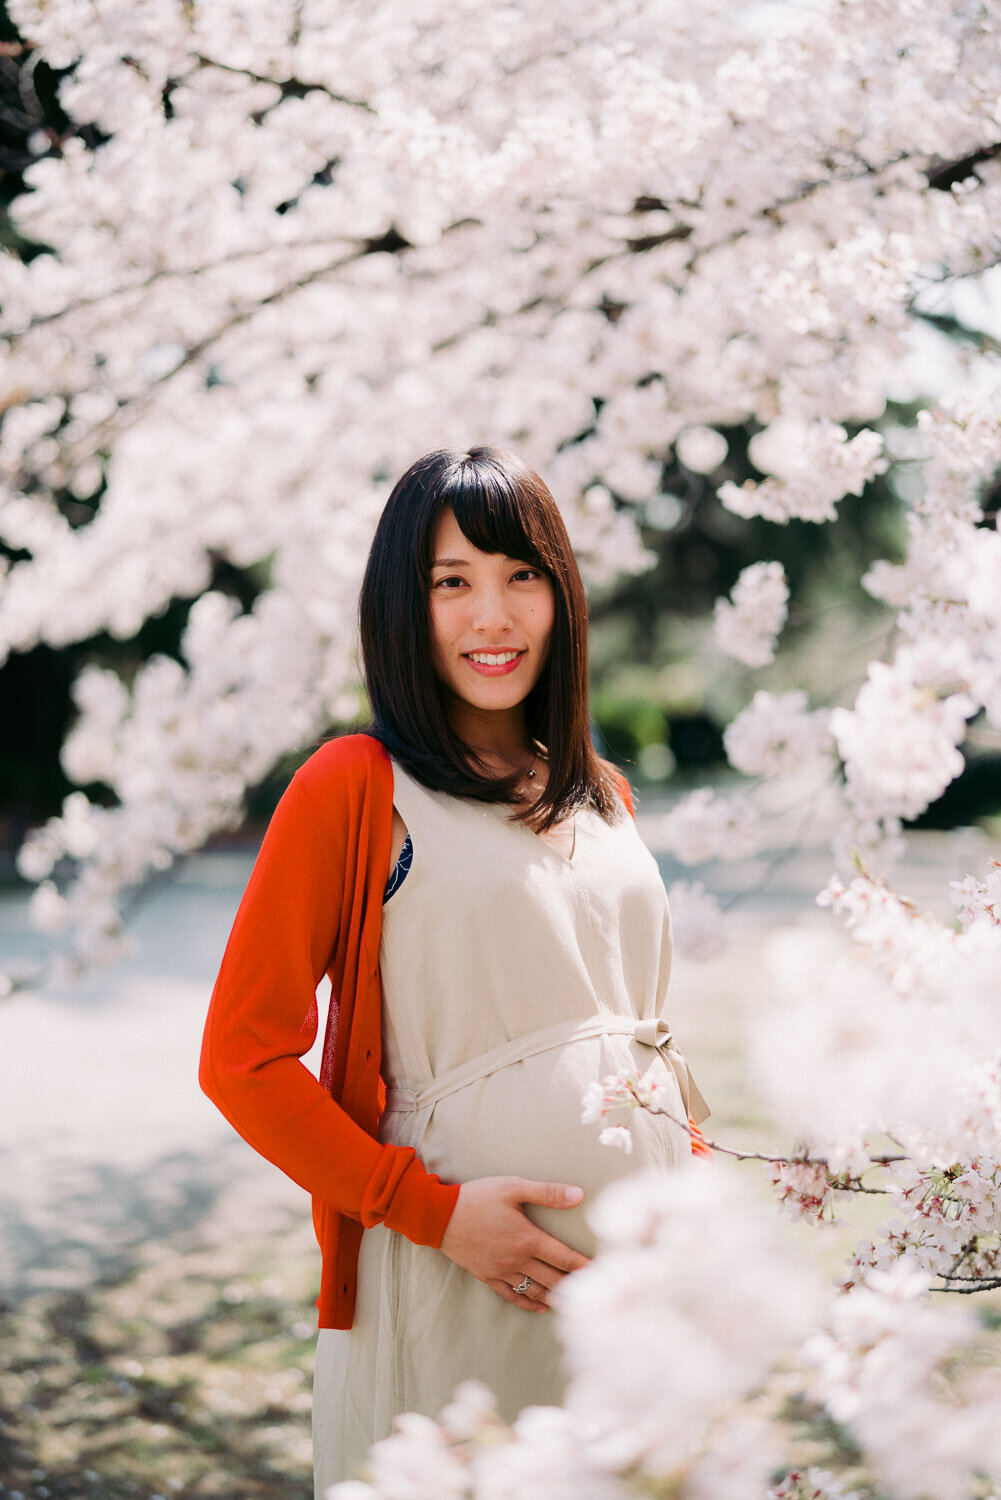 Maternity portrait surrounded by nature in Tokyo